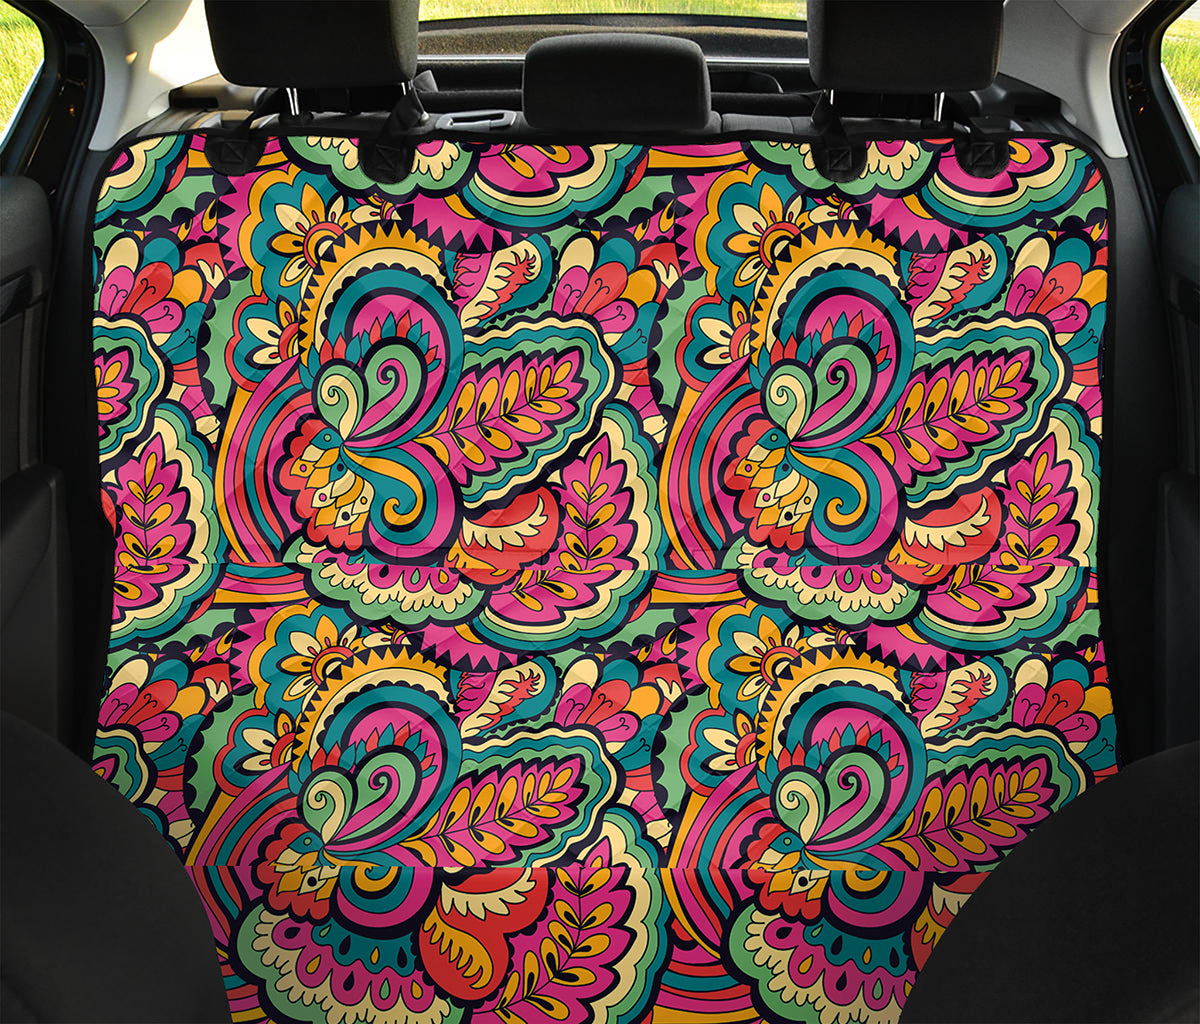 Retro Psychedelic Hippie Pattern Print Pet Car Back Seat Cover